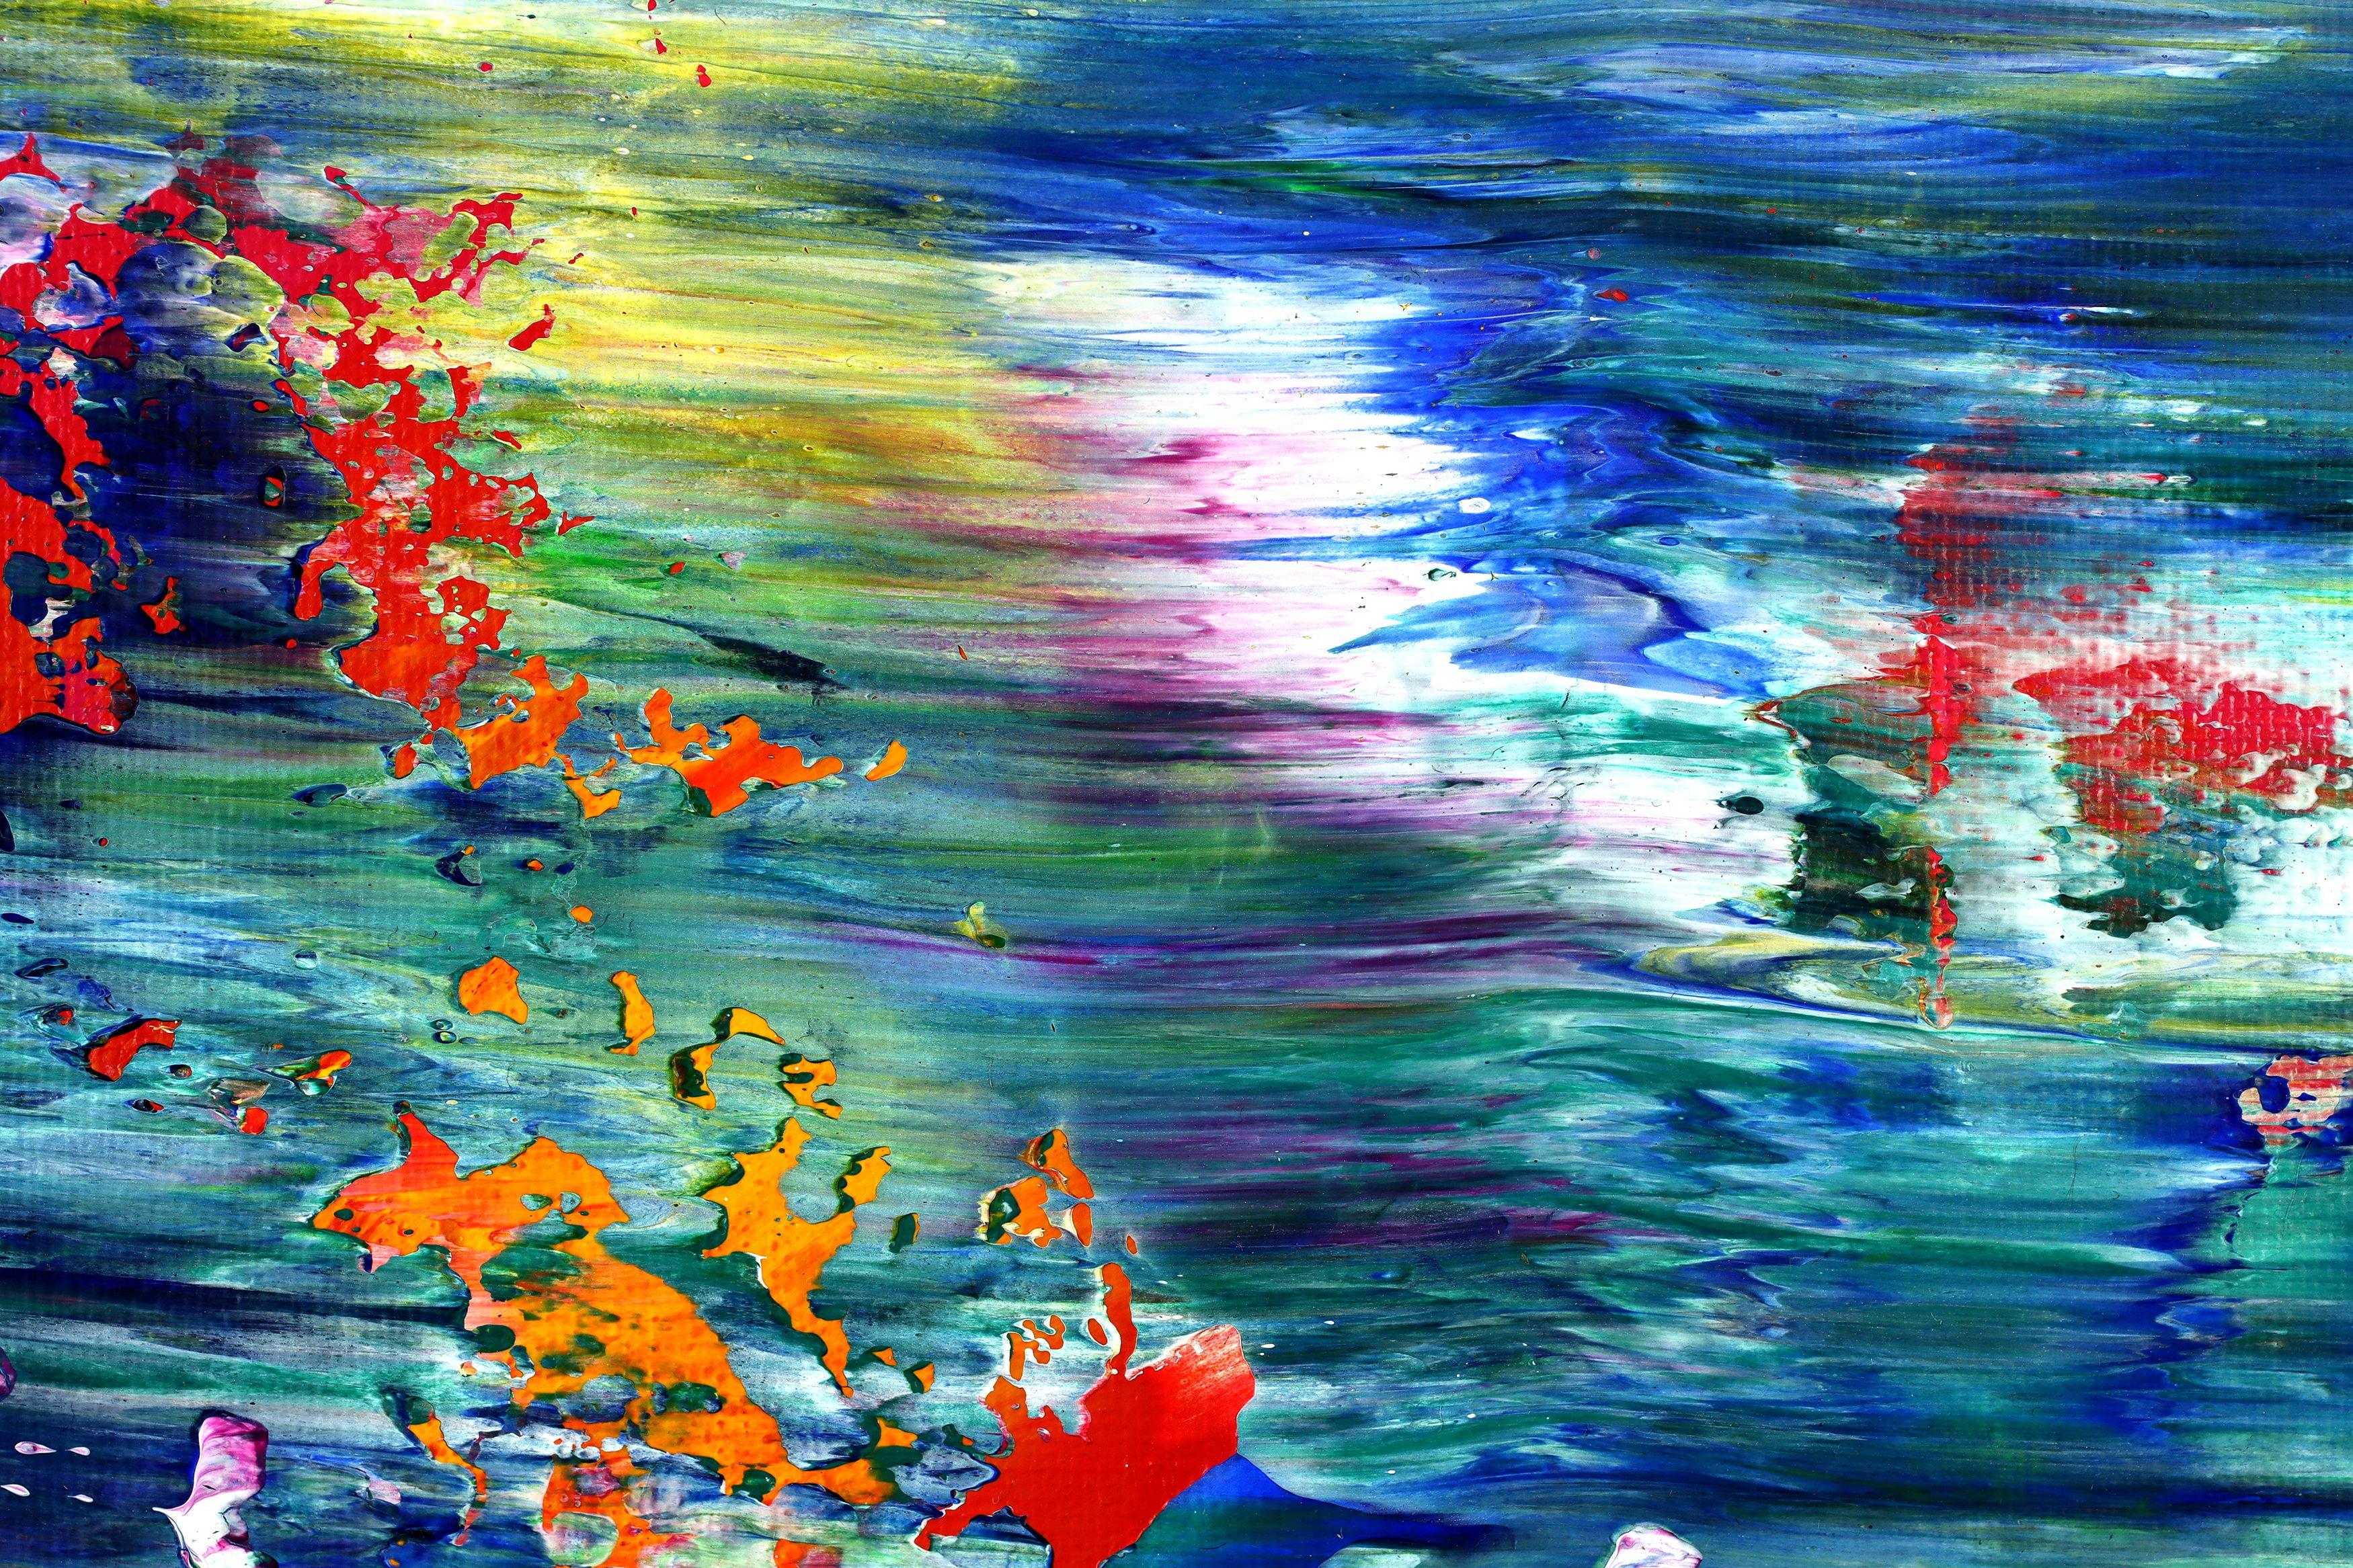 Caribbean energy (Ocean and forest), Painting, Acrylic on Canvas - Blue Abstract Painting by Nestor Toro